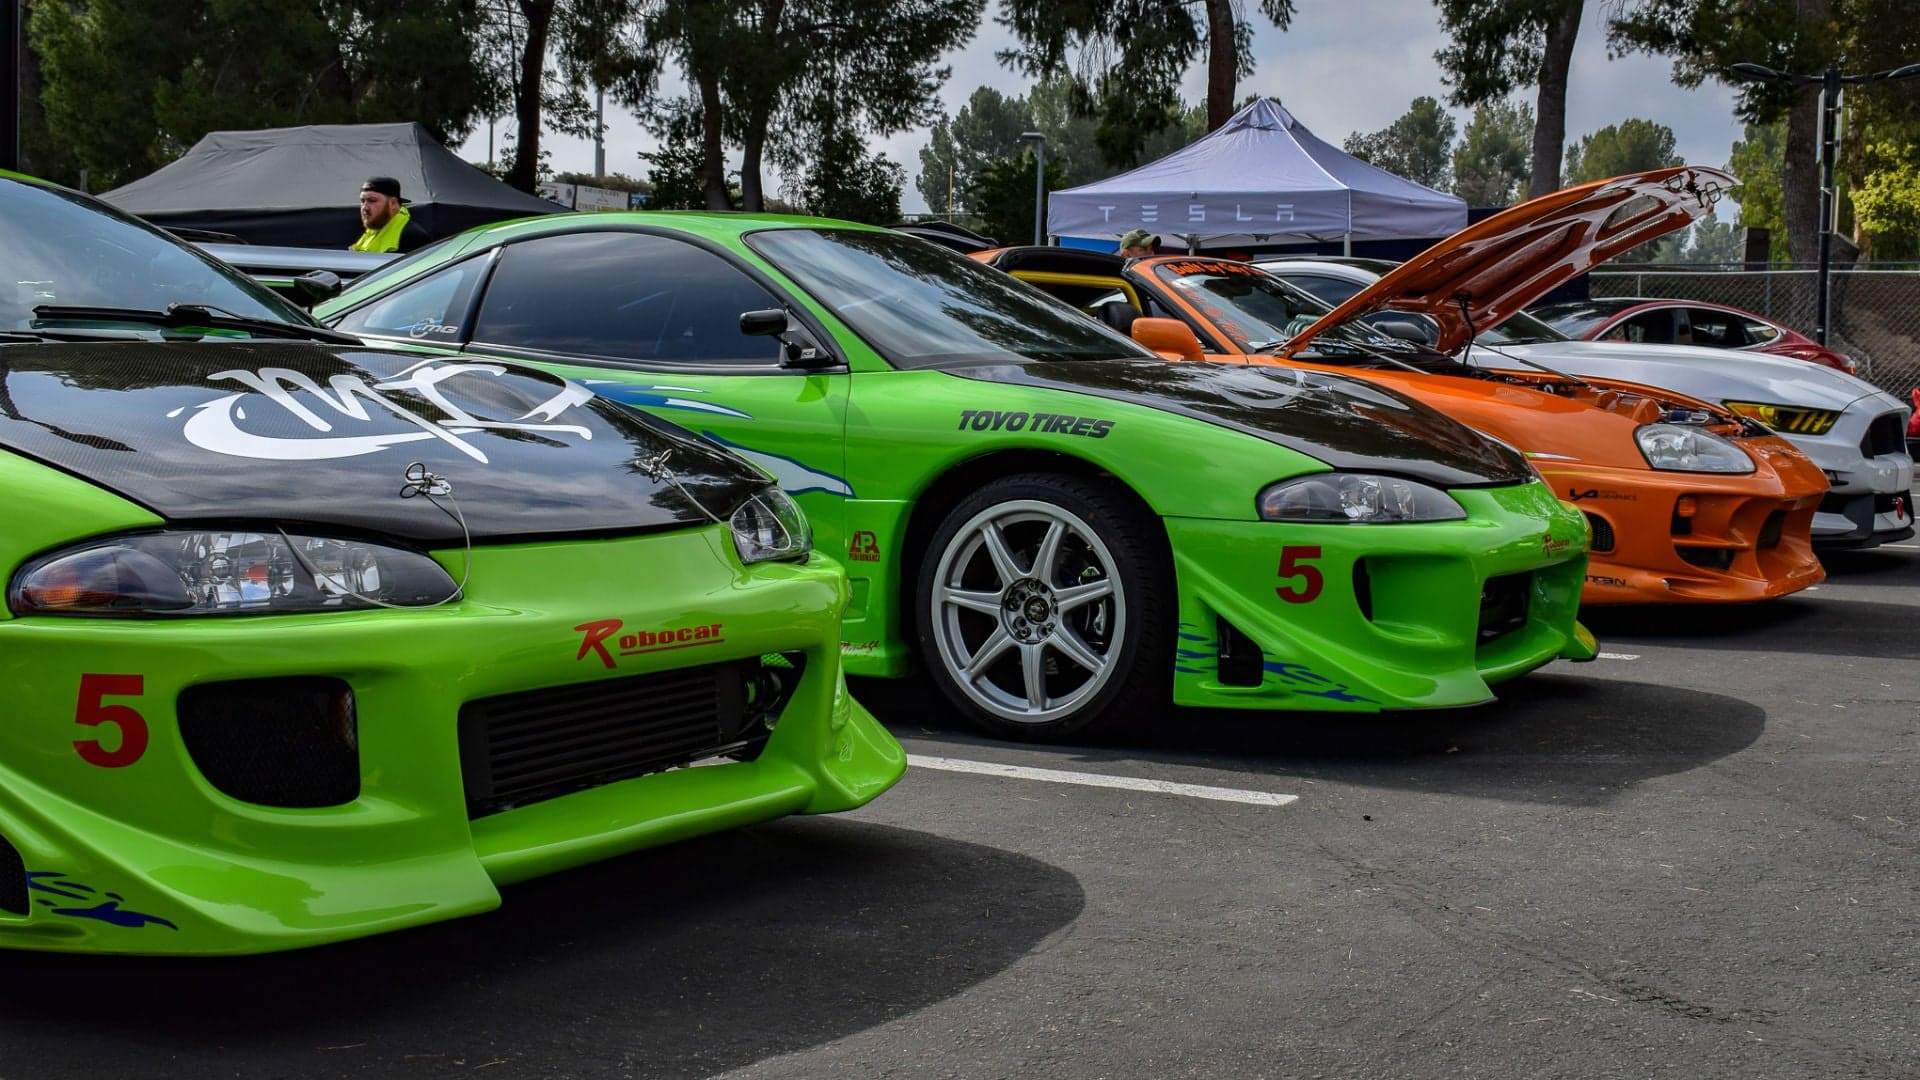 Paul Walker’s Brothers Host Charity Car Show in LA Featuring Fast & Furious Movie Cars